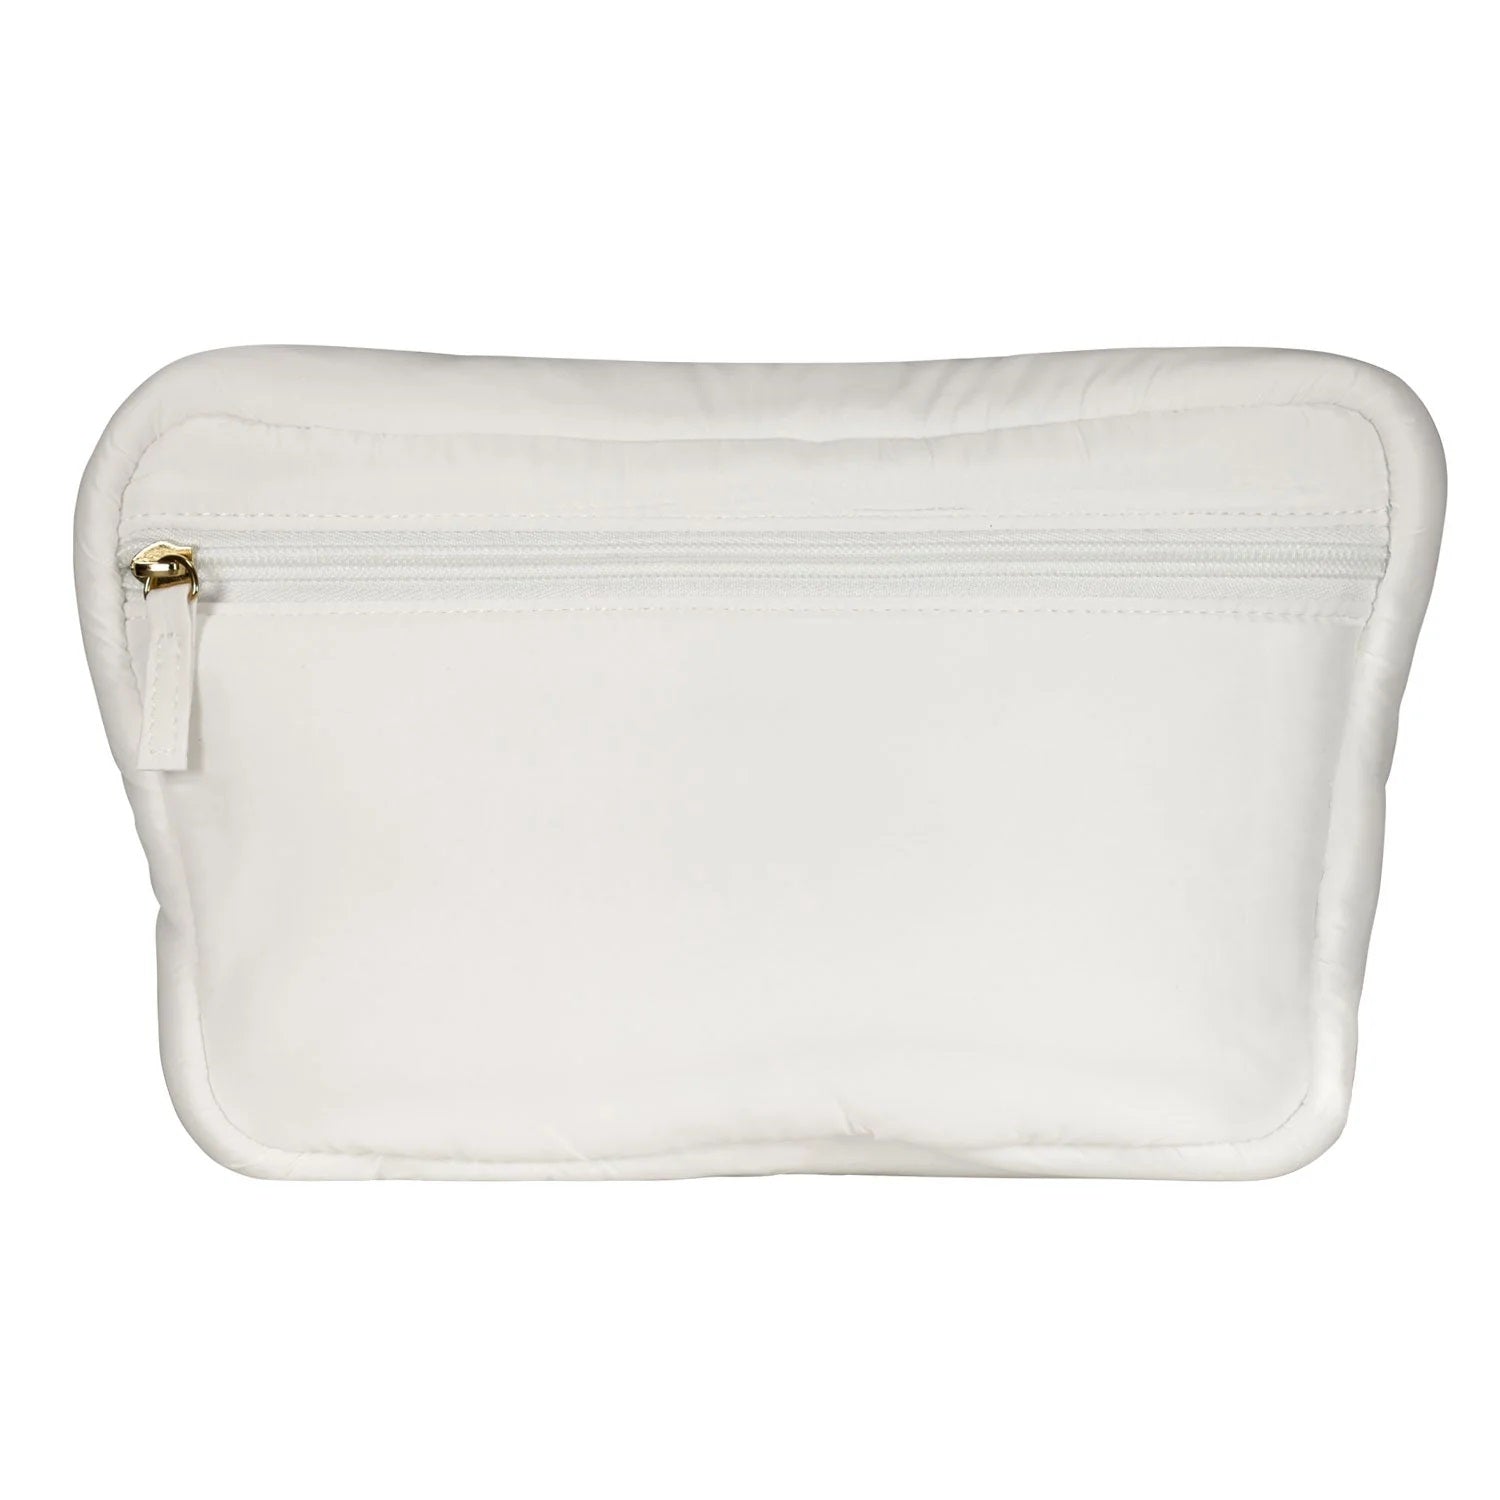 LIVING LIBATIONS Puffer Hip Bag with EMF Shield wisteria white